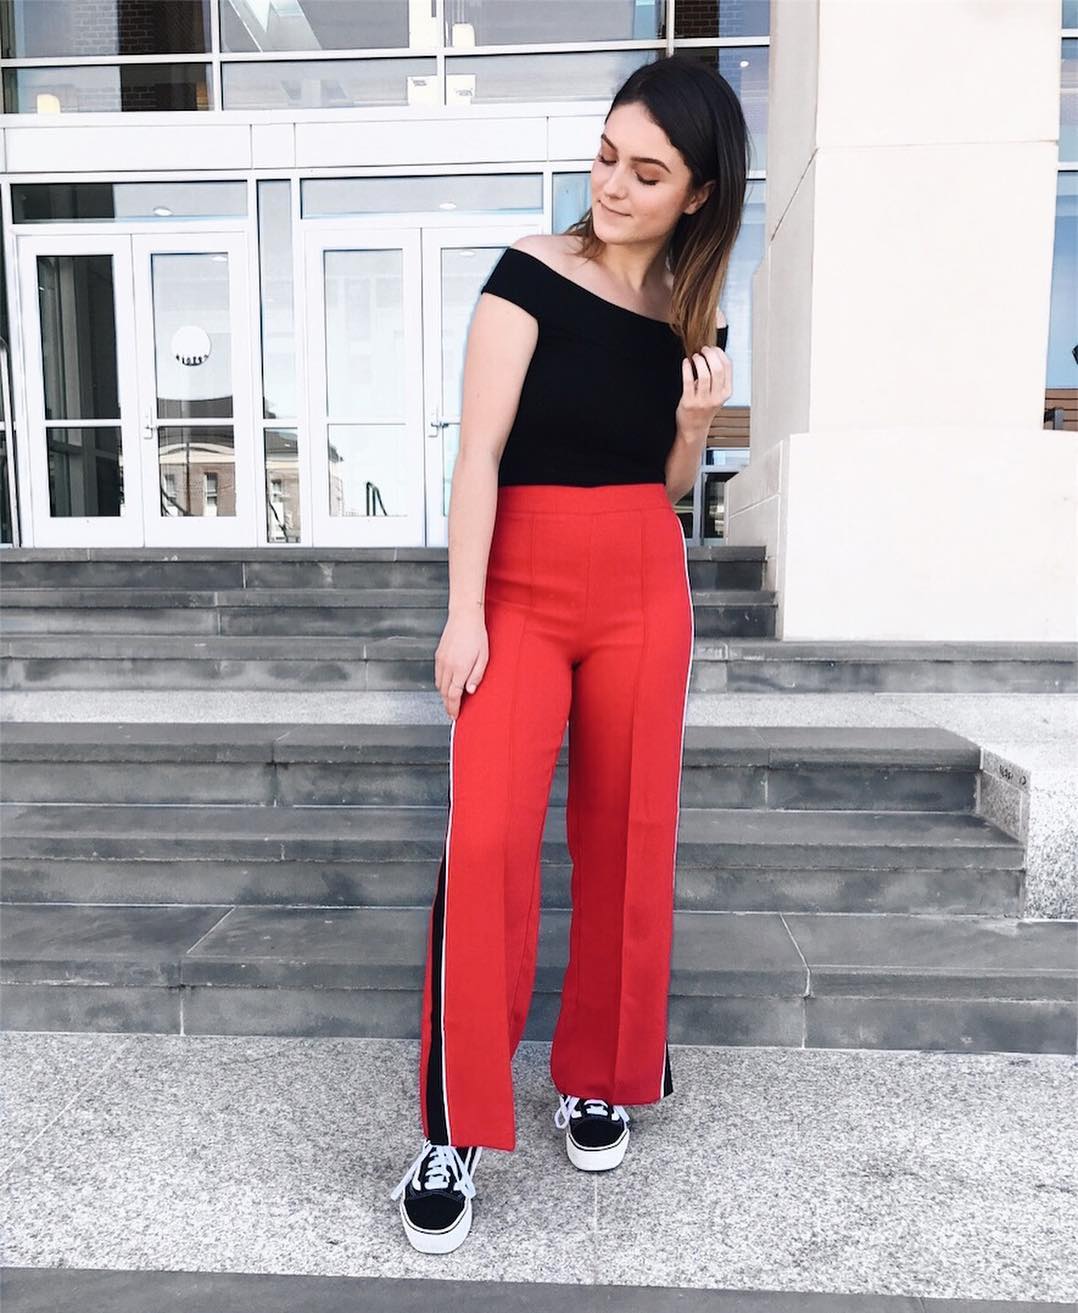 Wear Tailored Track Pants and an Off-the-Shoulder Top the First Day of School